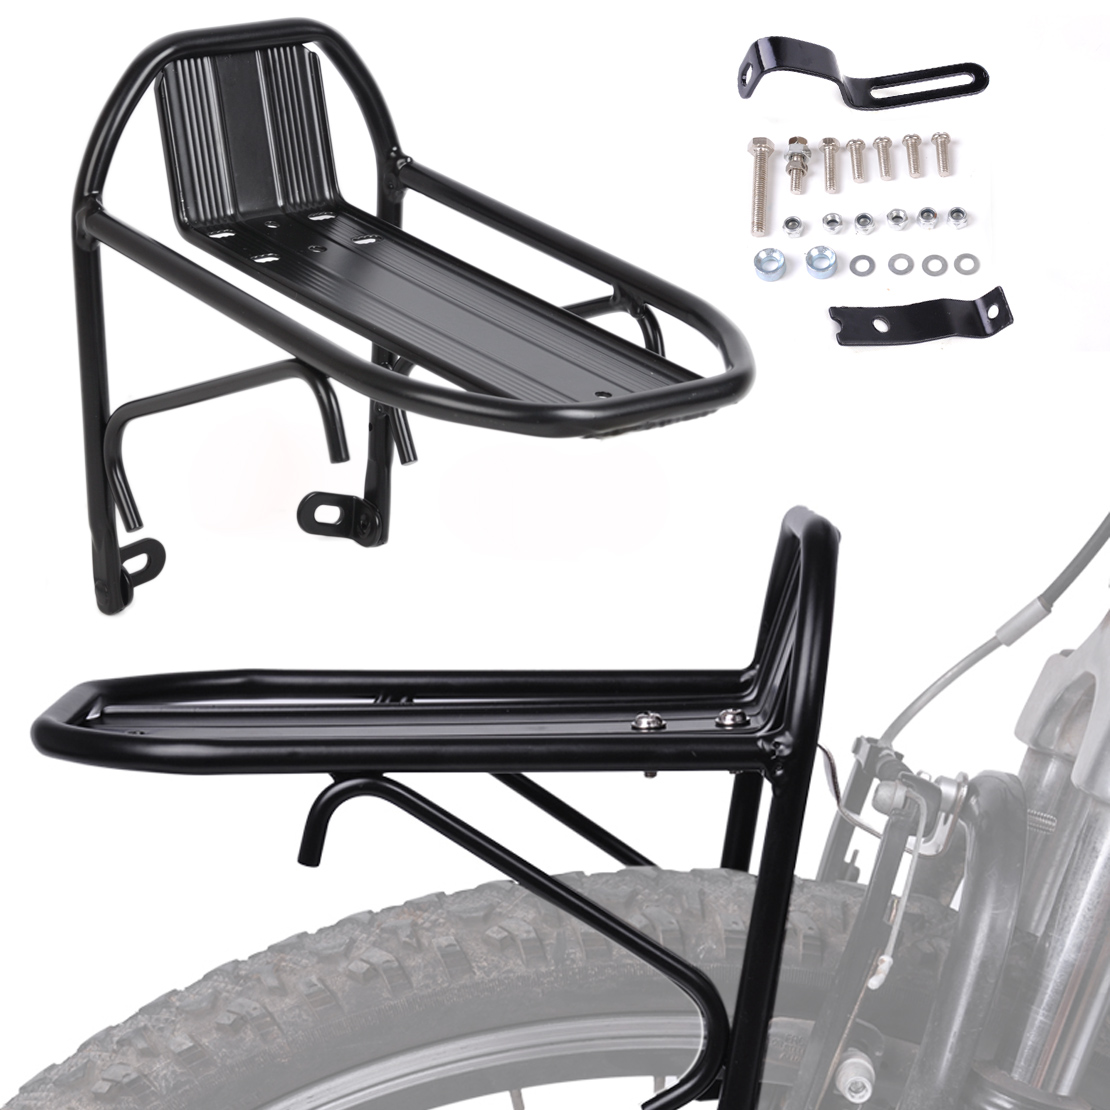  Aluminum  Alloy Sports Bicycle Bike Cycling Front Rack  